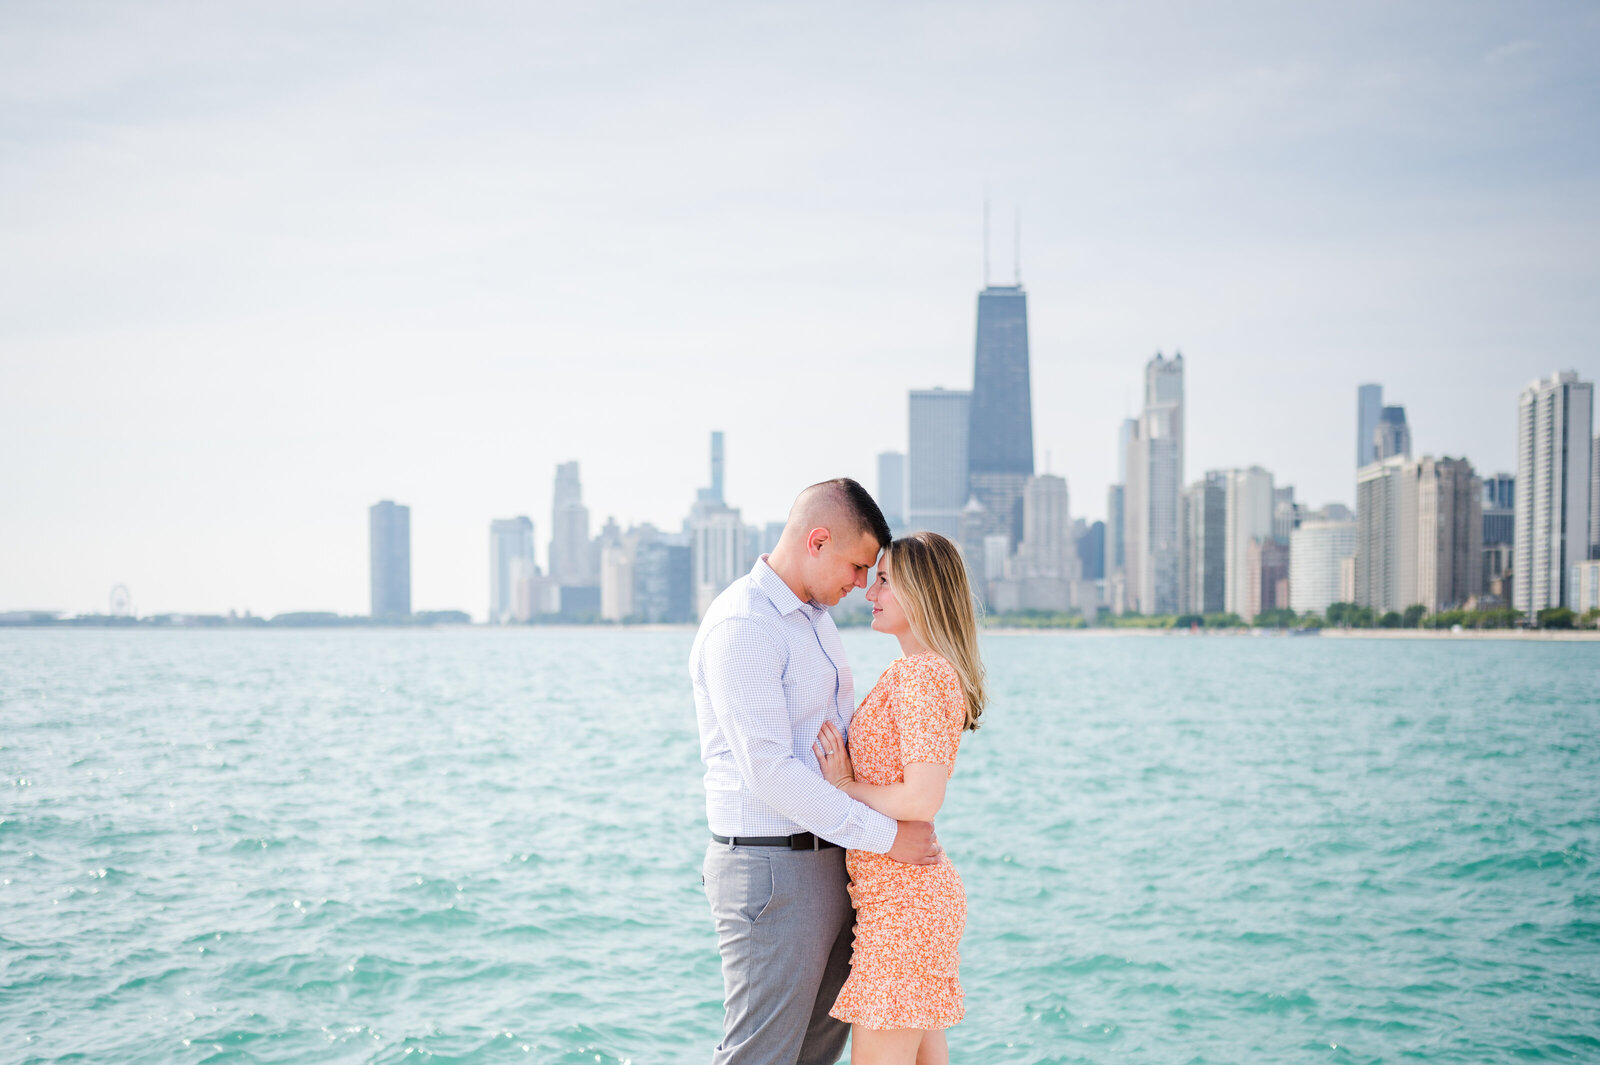 Newely engaged couple sharing a moment on North ave beach overlooking the Chicago skyline.